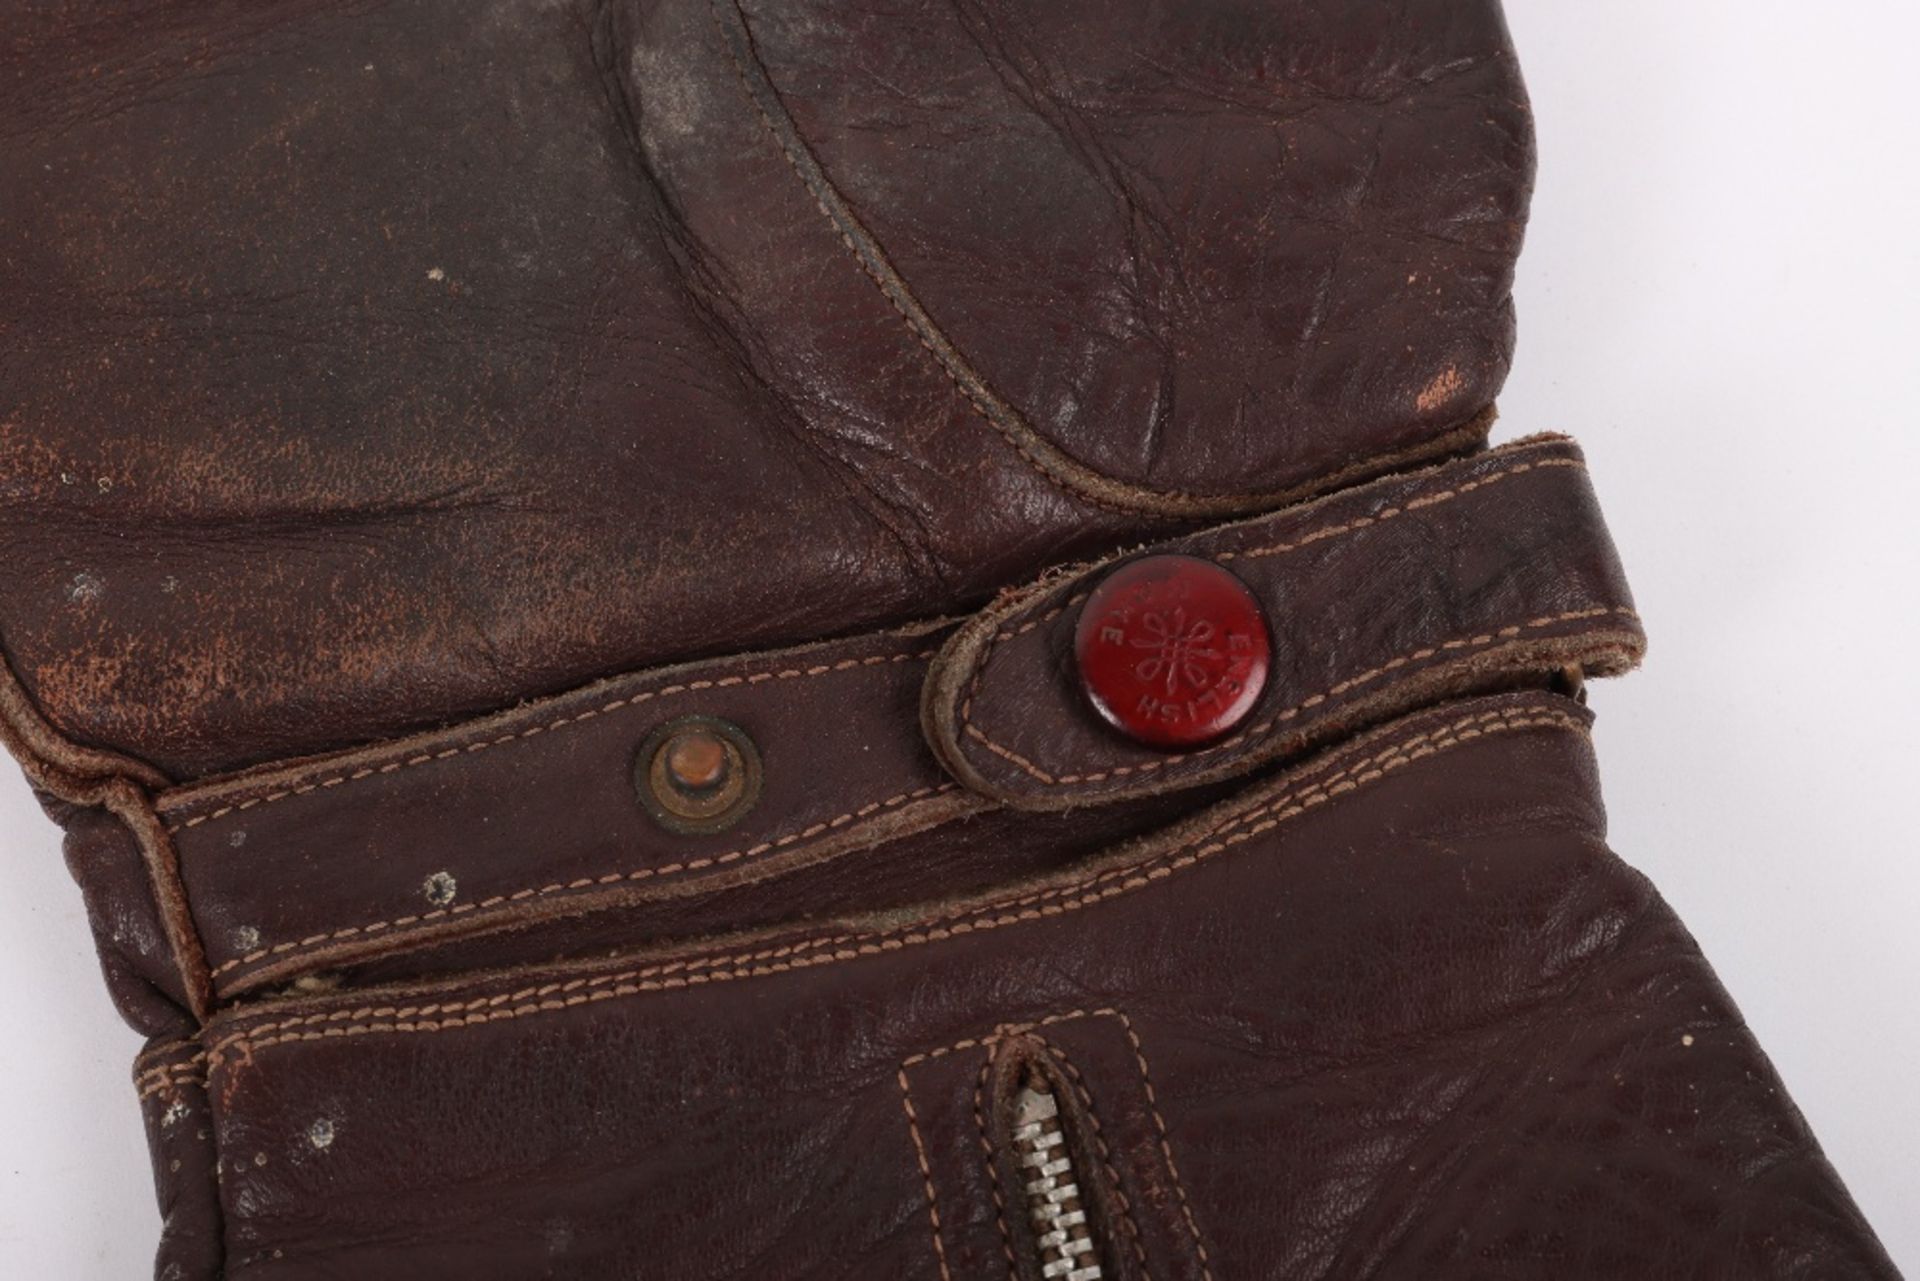 Pair of Brown Leather Aviators Gauntlets - Image 3 of 3